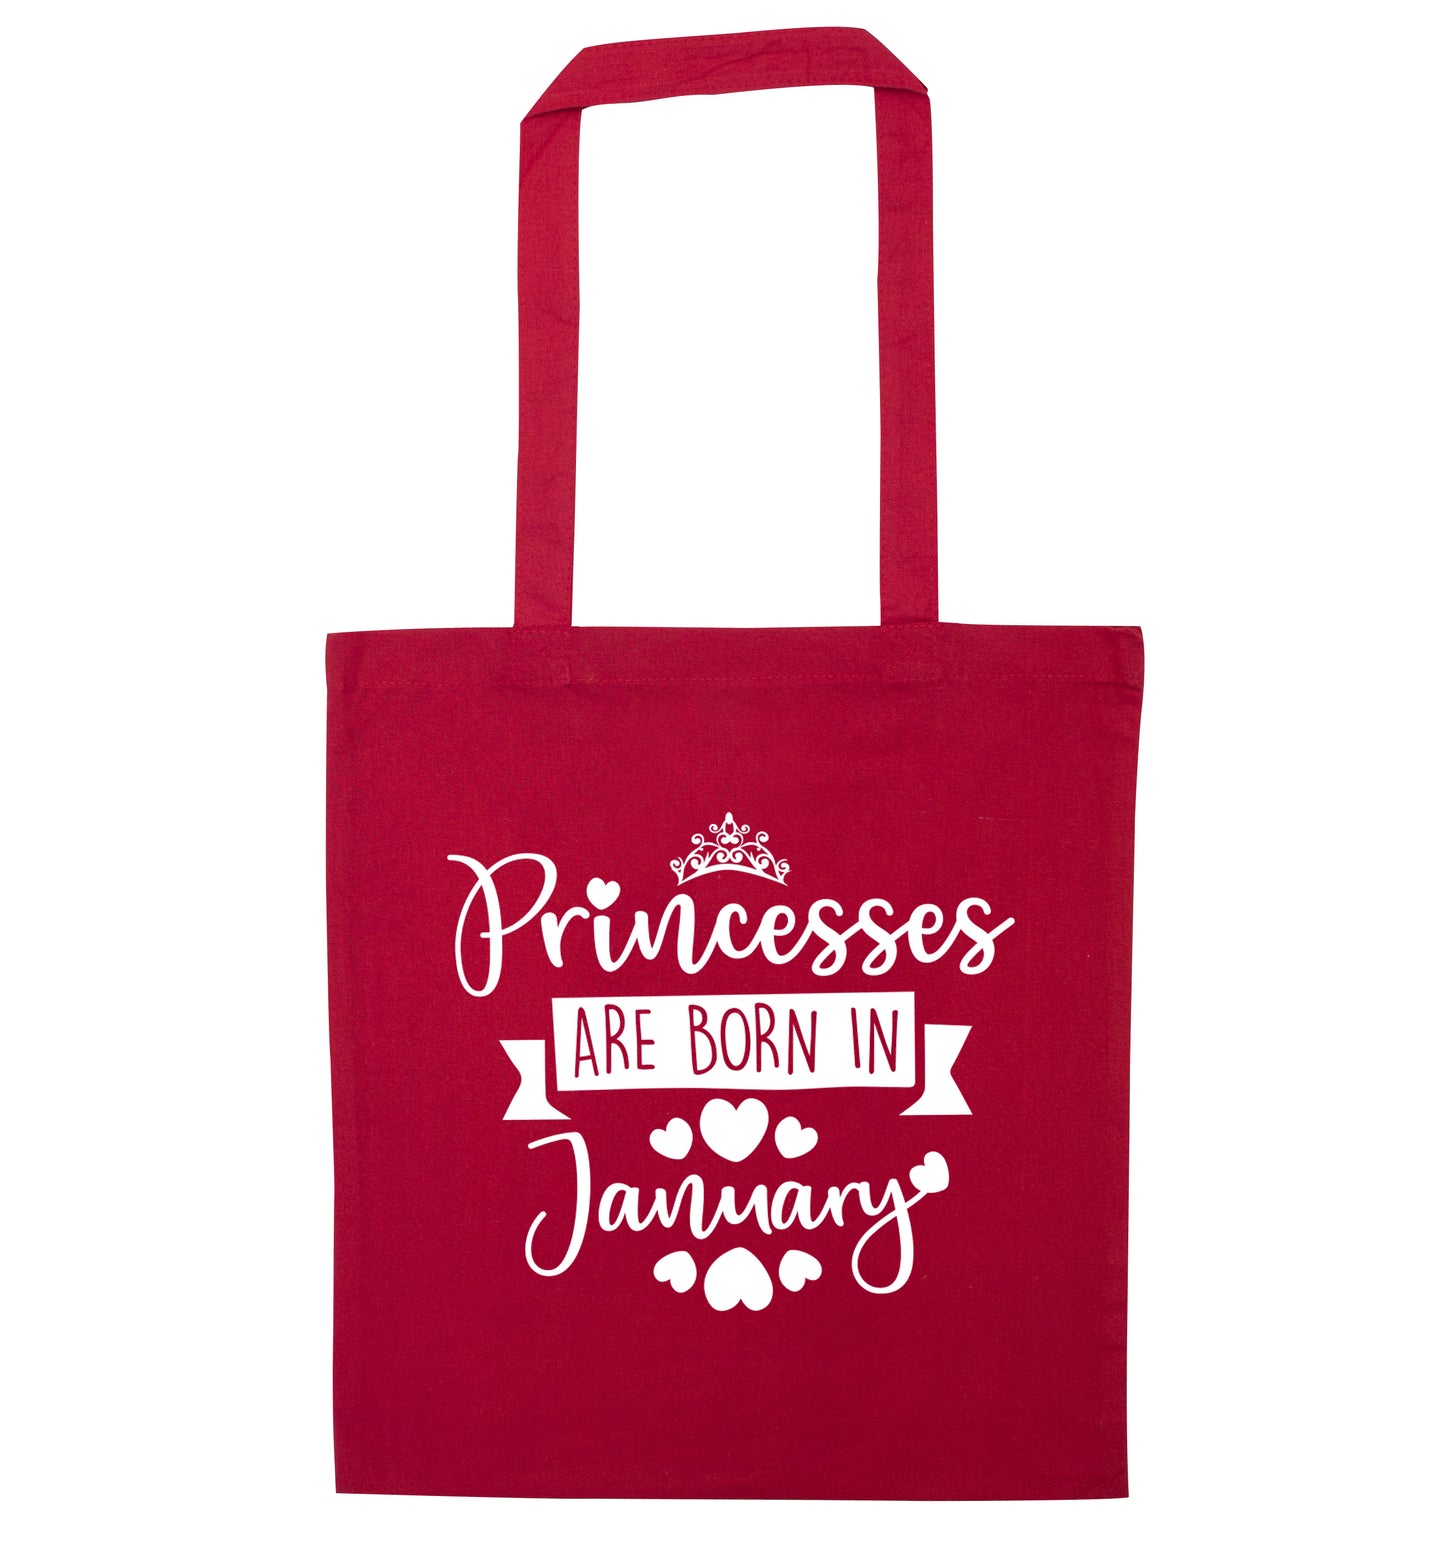 Princesses are born in January red tote bag